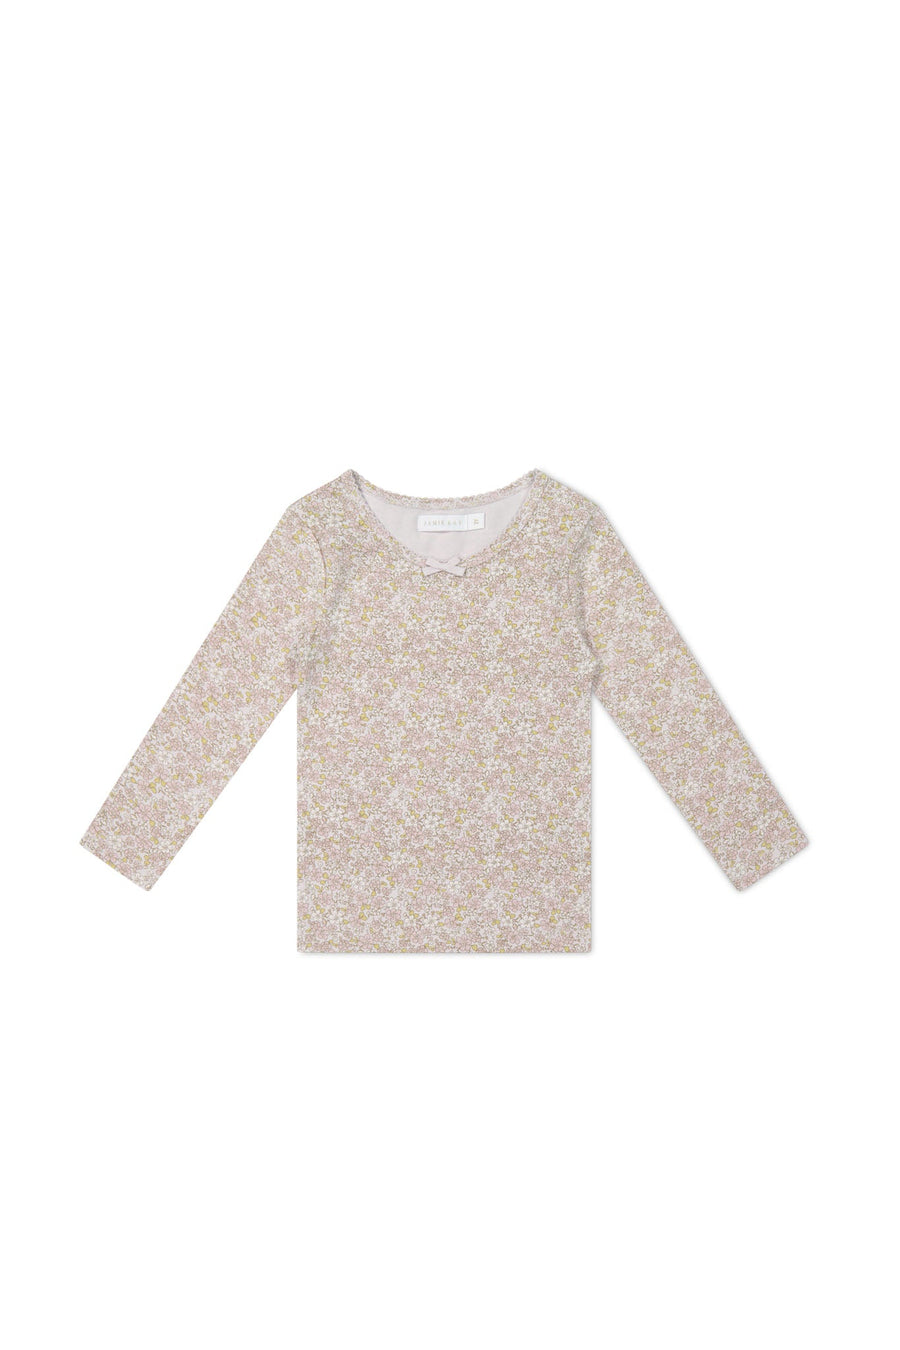 Organic Cotton Long Sleeve Top - Chloe Lilac Childrens Top from Jamie Kay USA